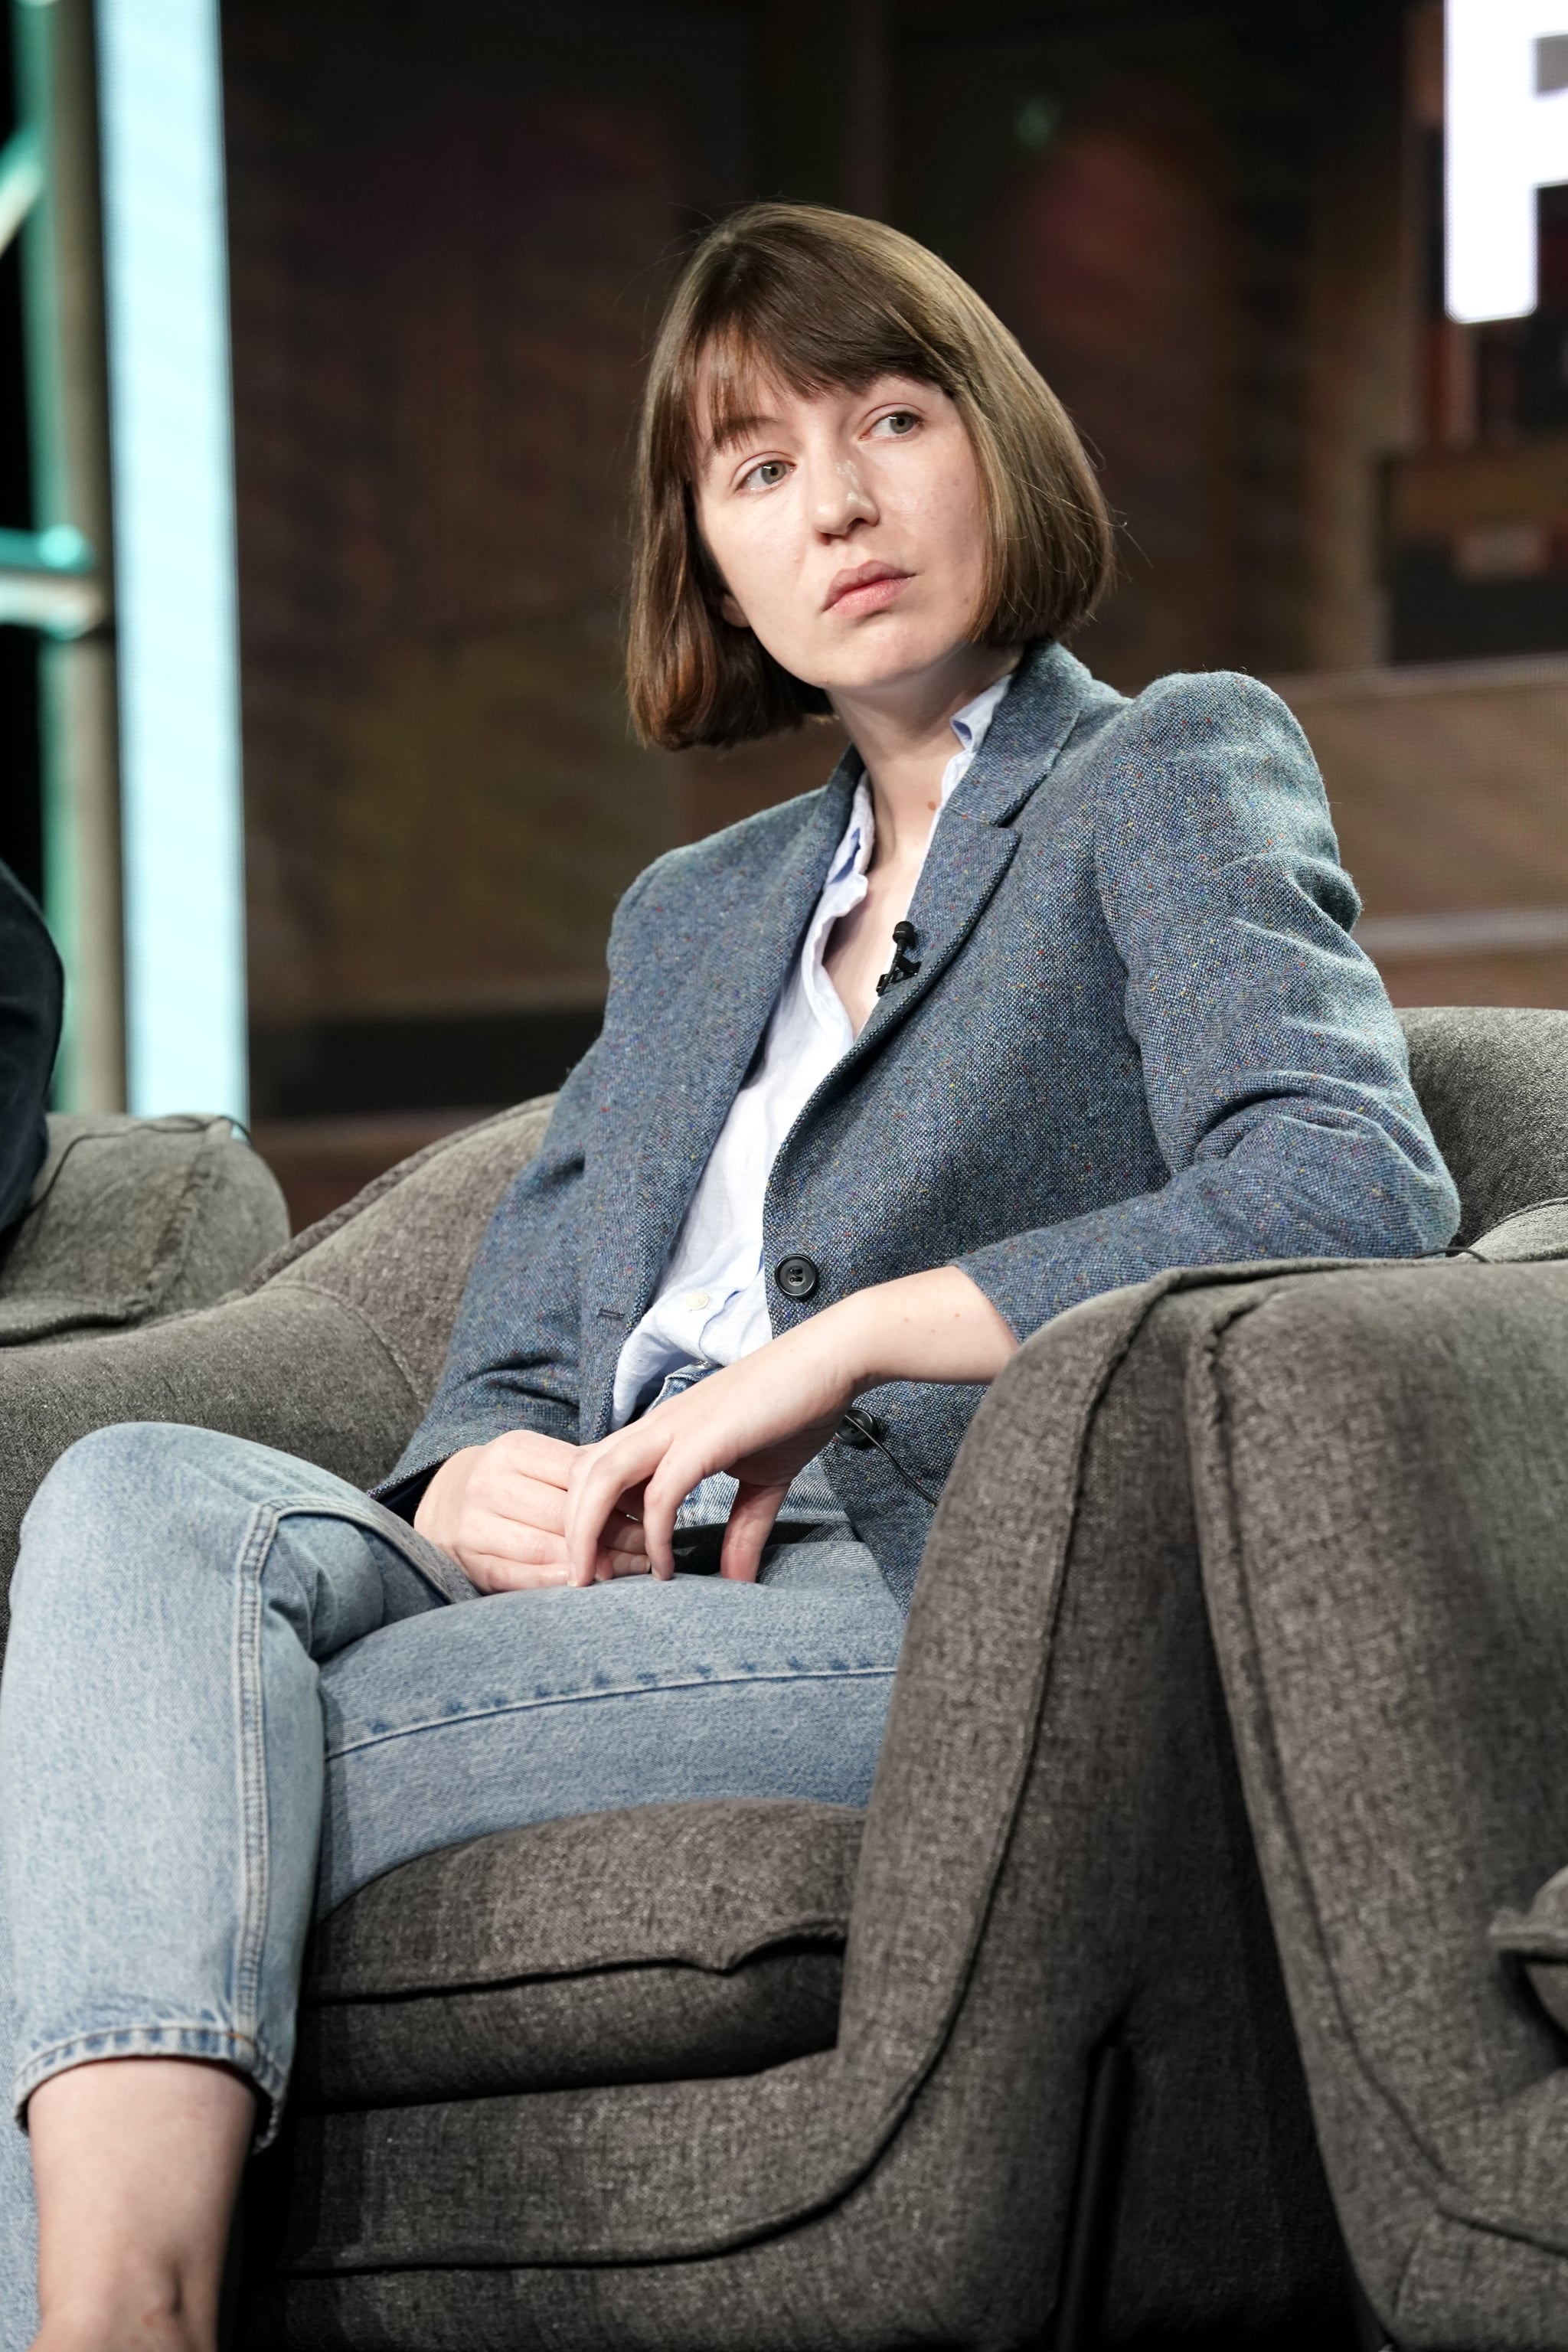 Occur chapter Plausible Sally Rooney: Is She Involved in the Hulu's Adaptation of "Conversations  With Friends"? | Hulu's "Conversations With Friends" Promises 2 Messy Love  Triangles | POPSUGAR Entertainment Photo 4